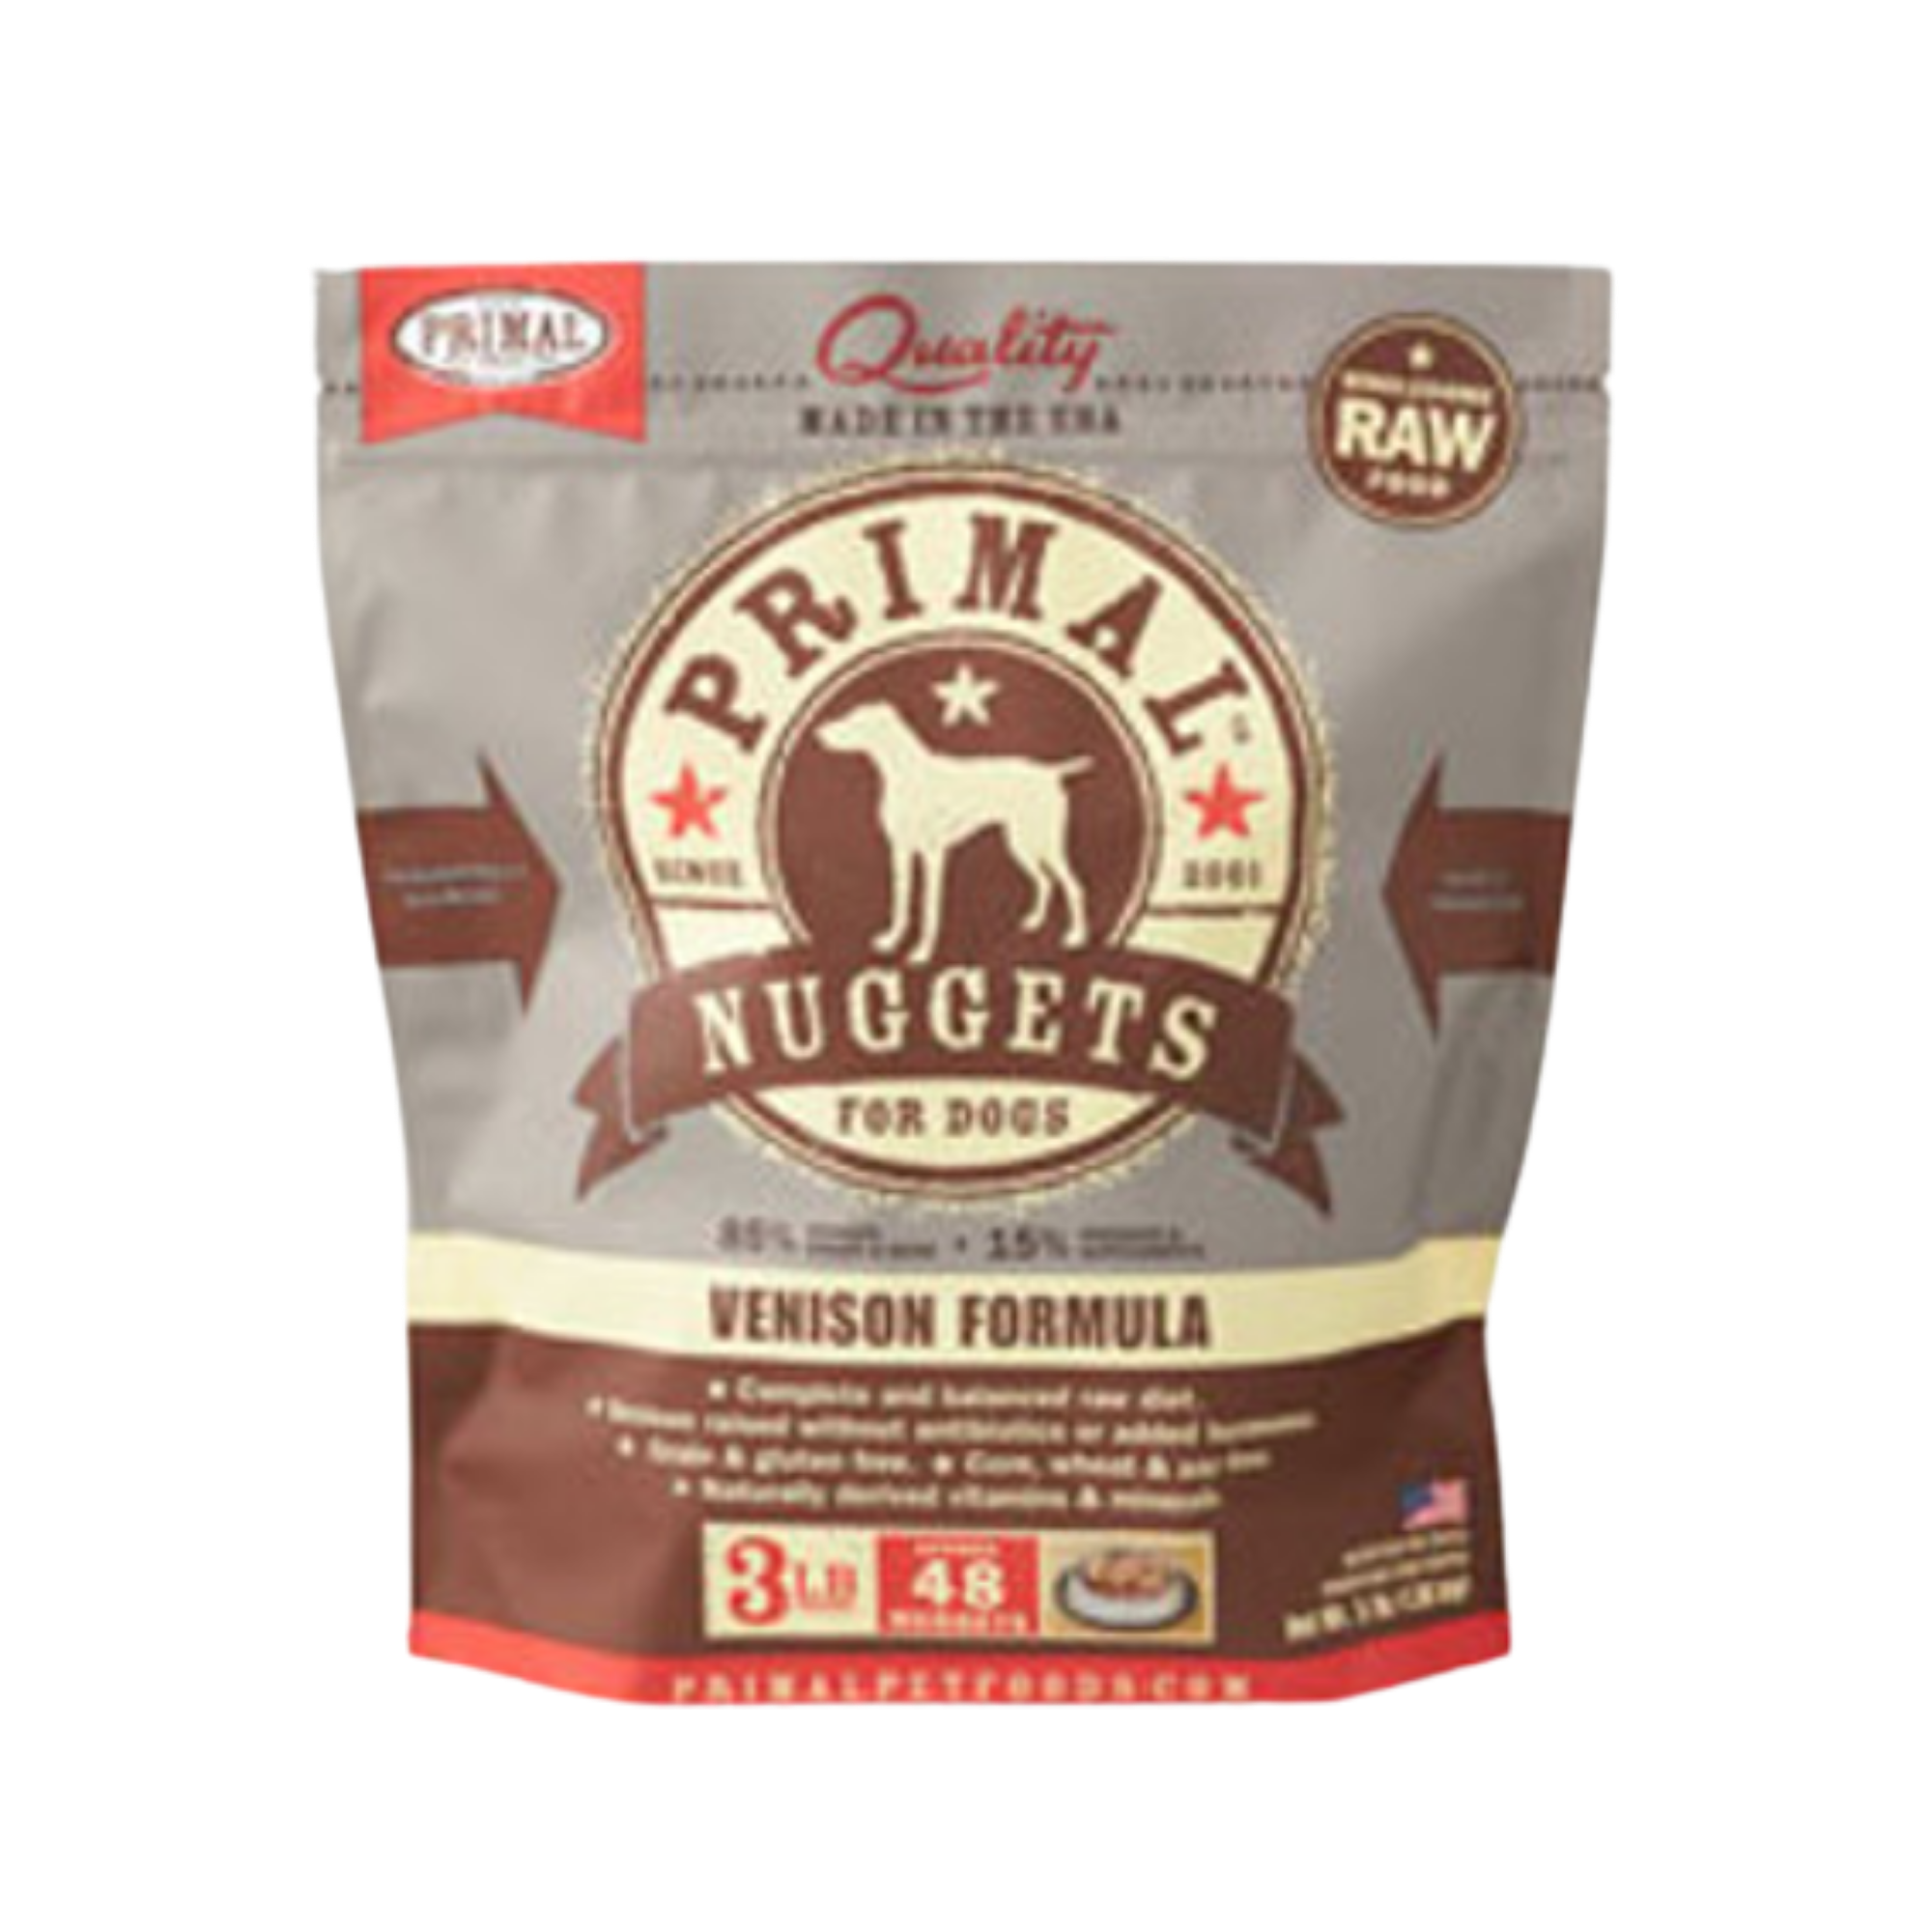 Primal Nuggets Venison Formula Frozen Raw Dog Food 3 lbs - Mutts & Co.